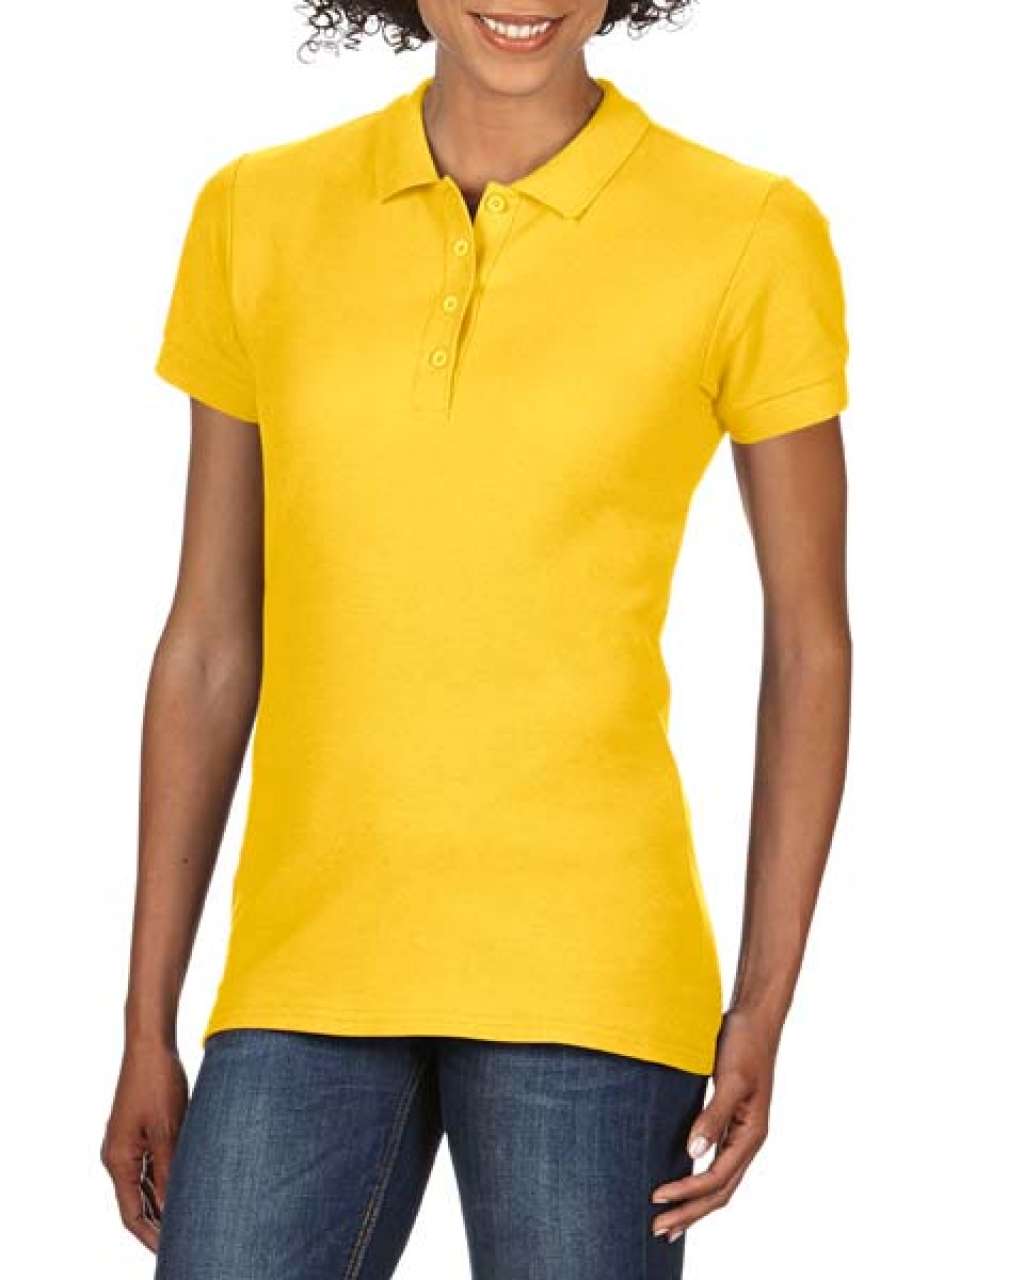 SOFTSTYLE® LADIES' DOUBLE PIQUÉ POLO. NEW MODEL COMING SOON